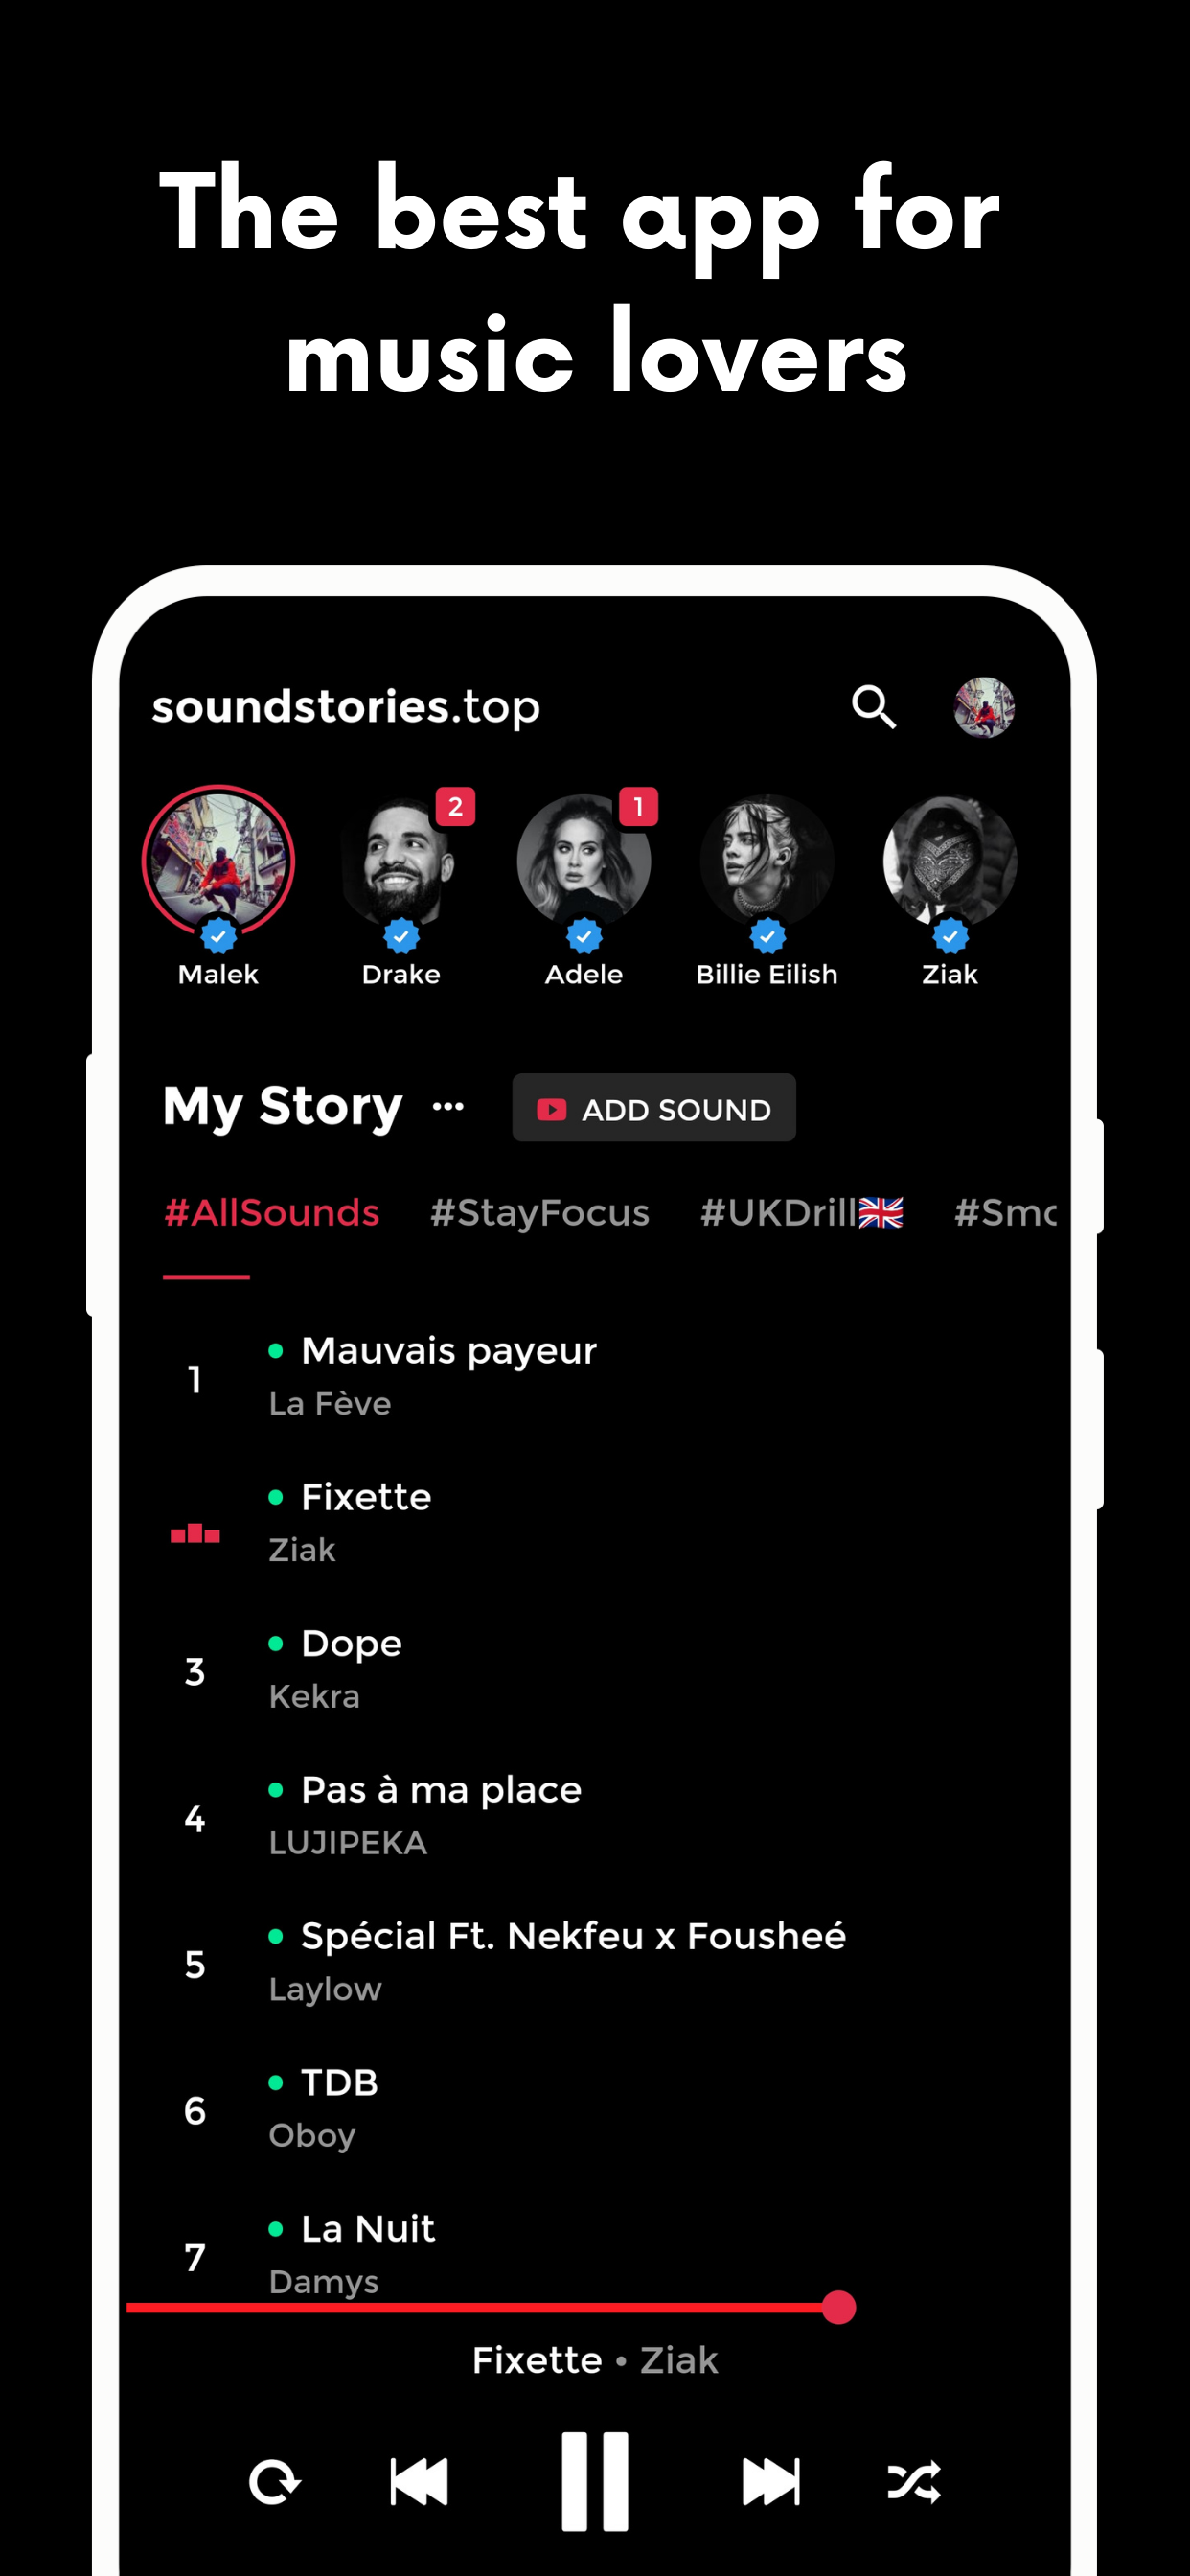 The best app for music lovers